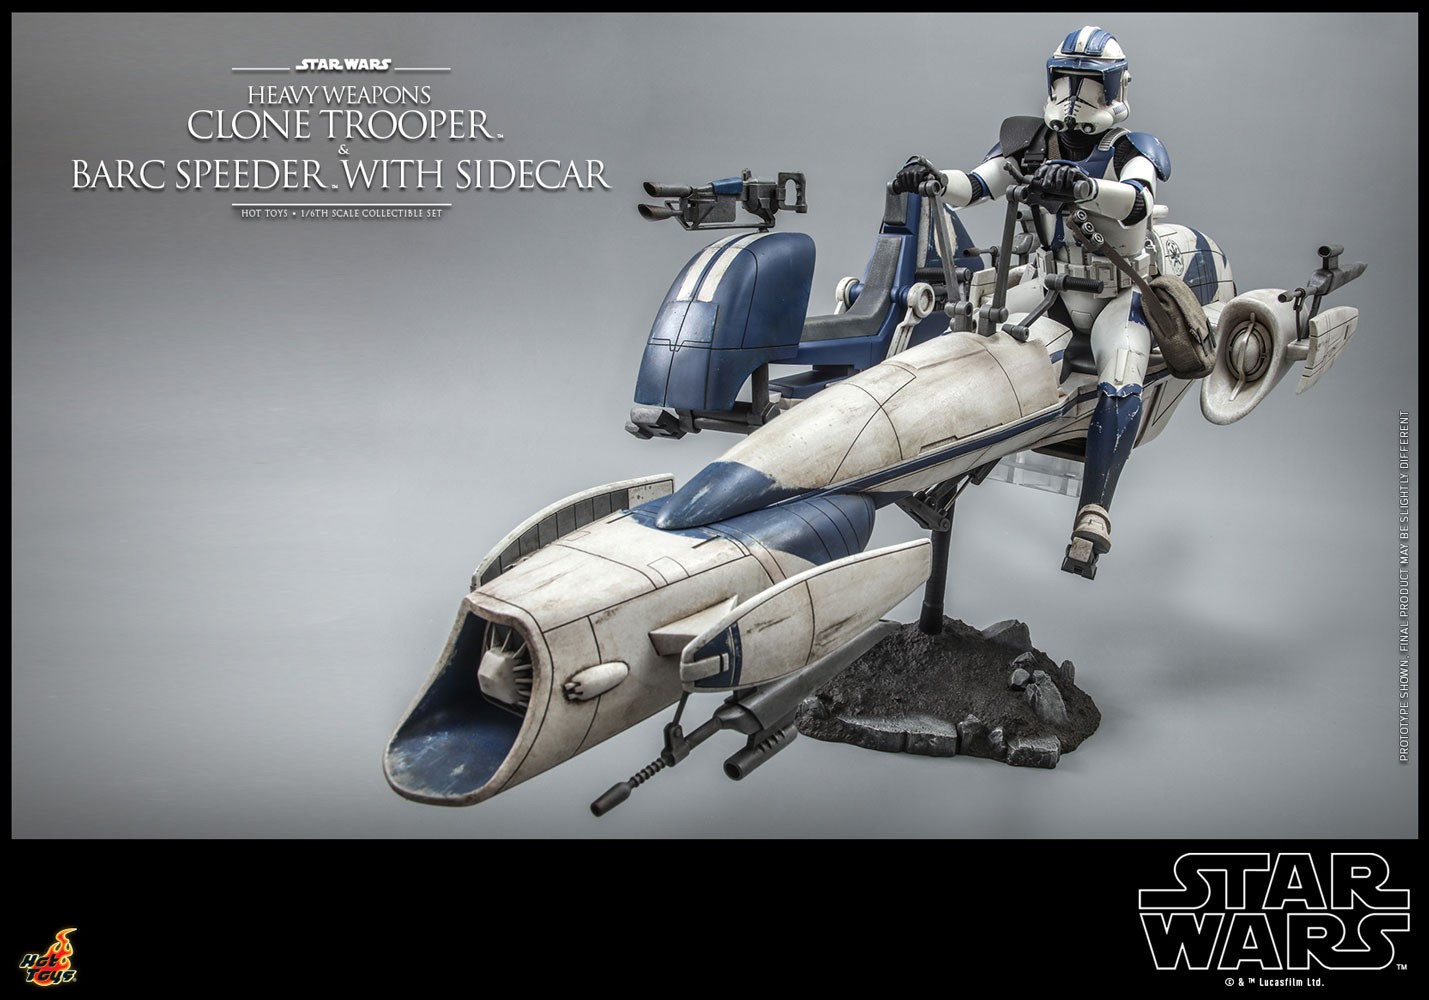 Heavy Weapons Clone Trooper and BARC Speeder with Sidecar- Prototype Shown